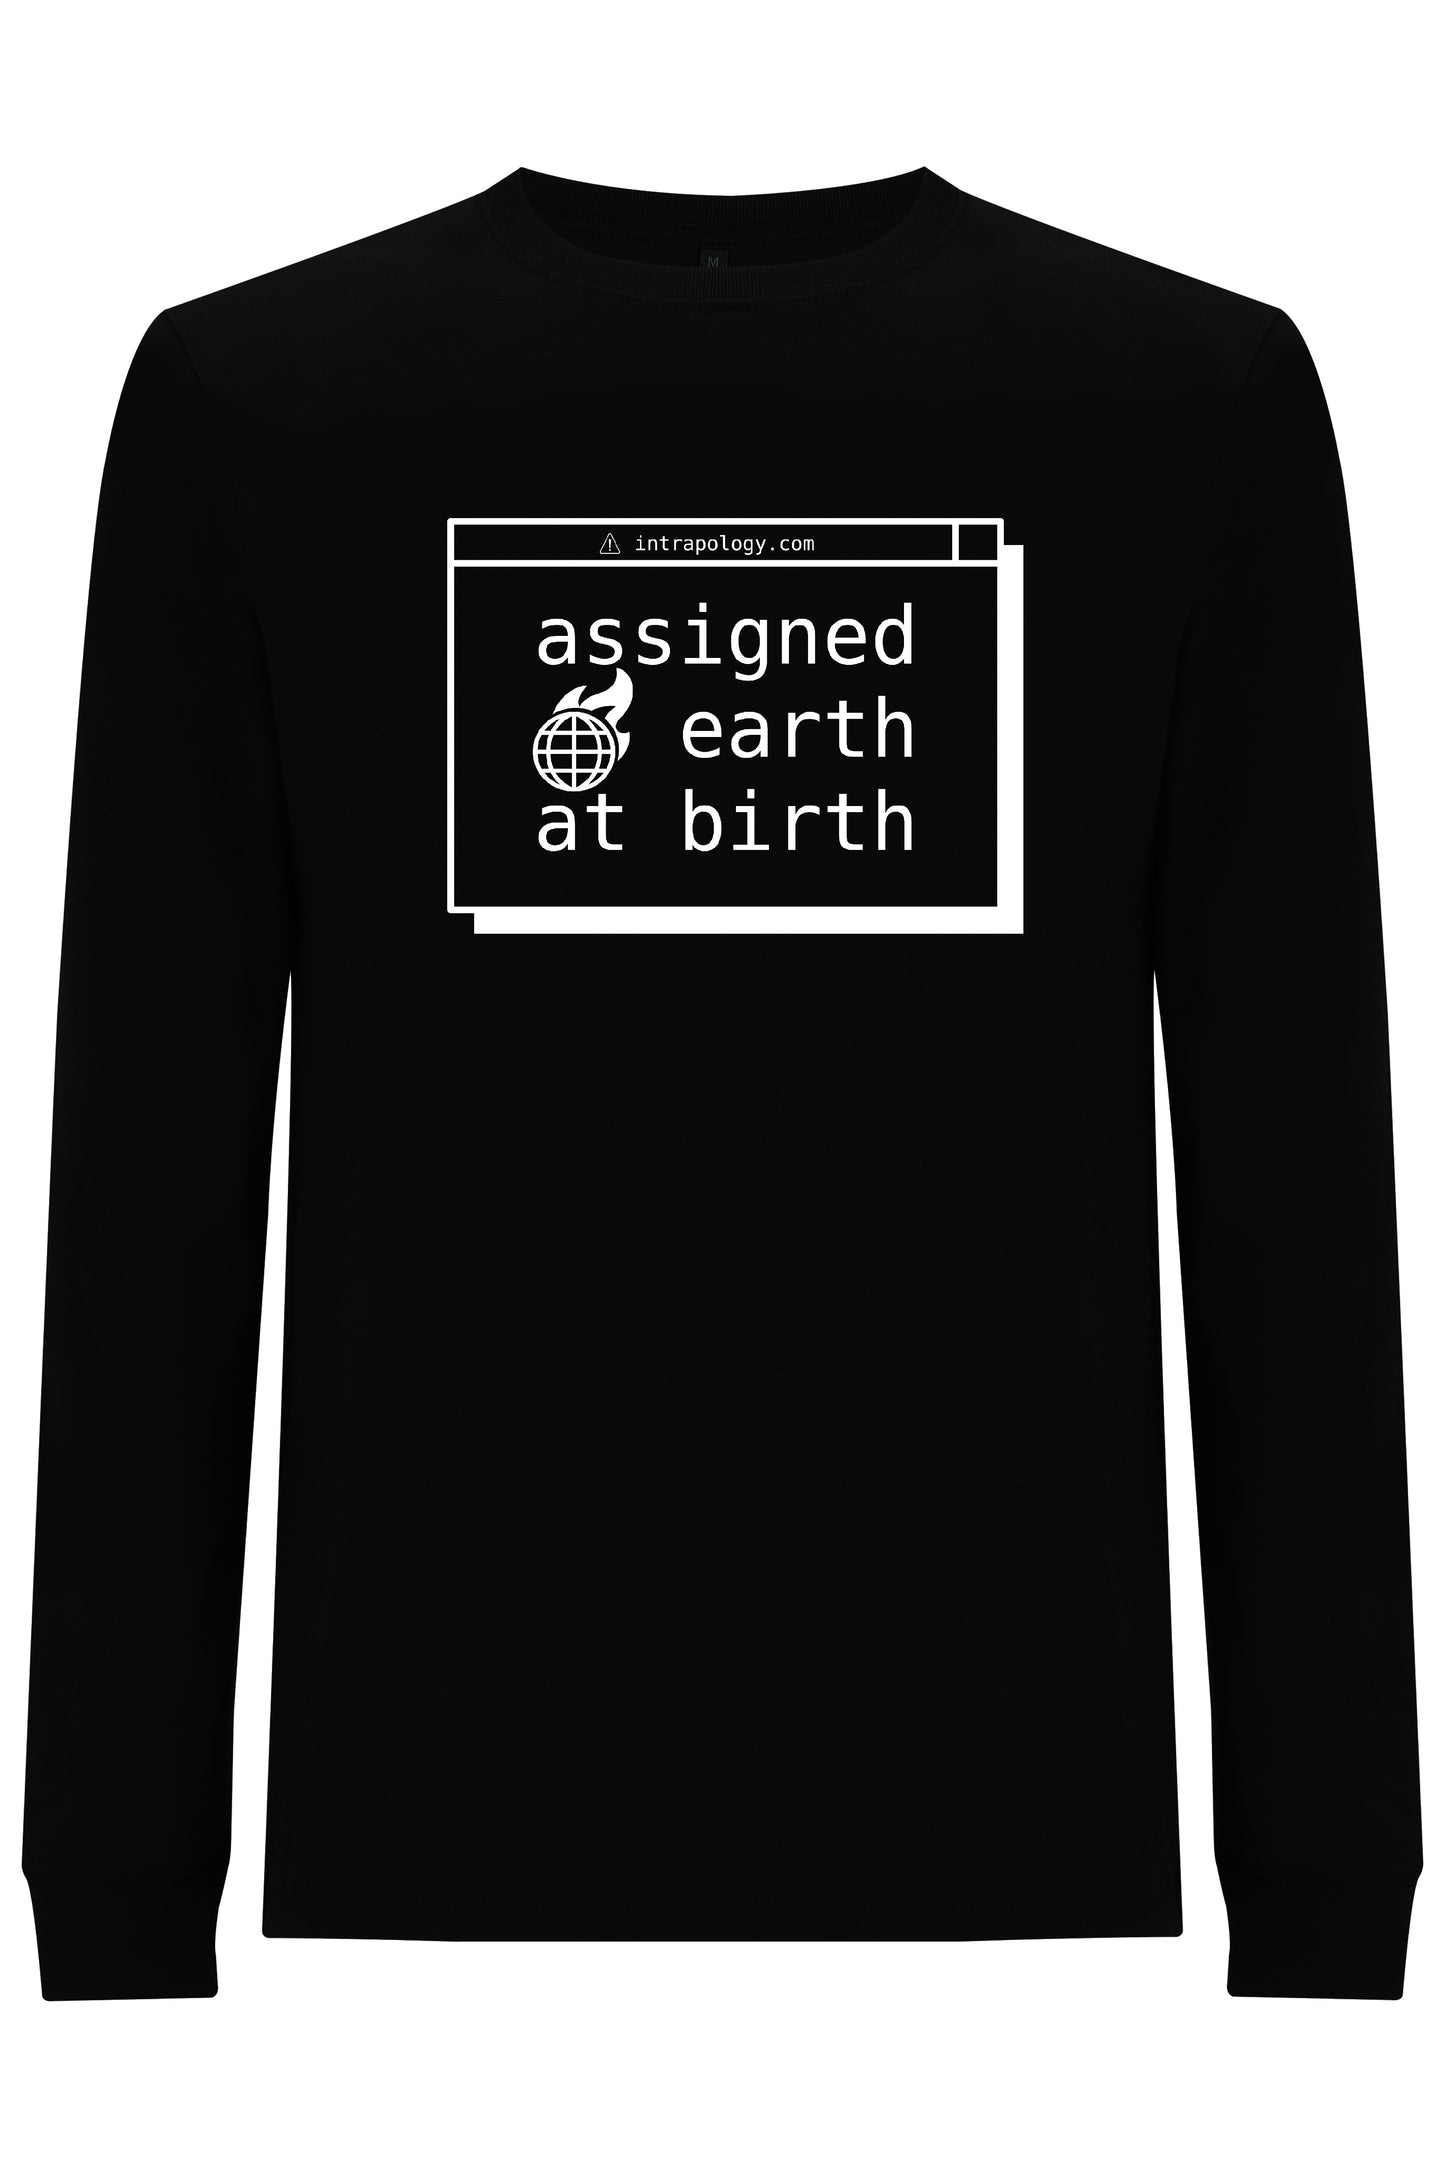 Assigned Earth at Birth | unisex tops (shirts and hoodies)